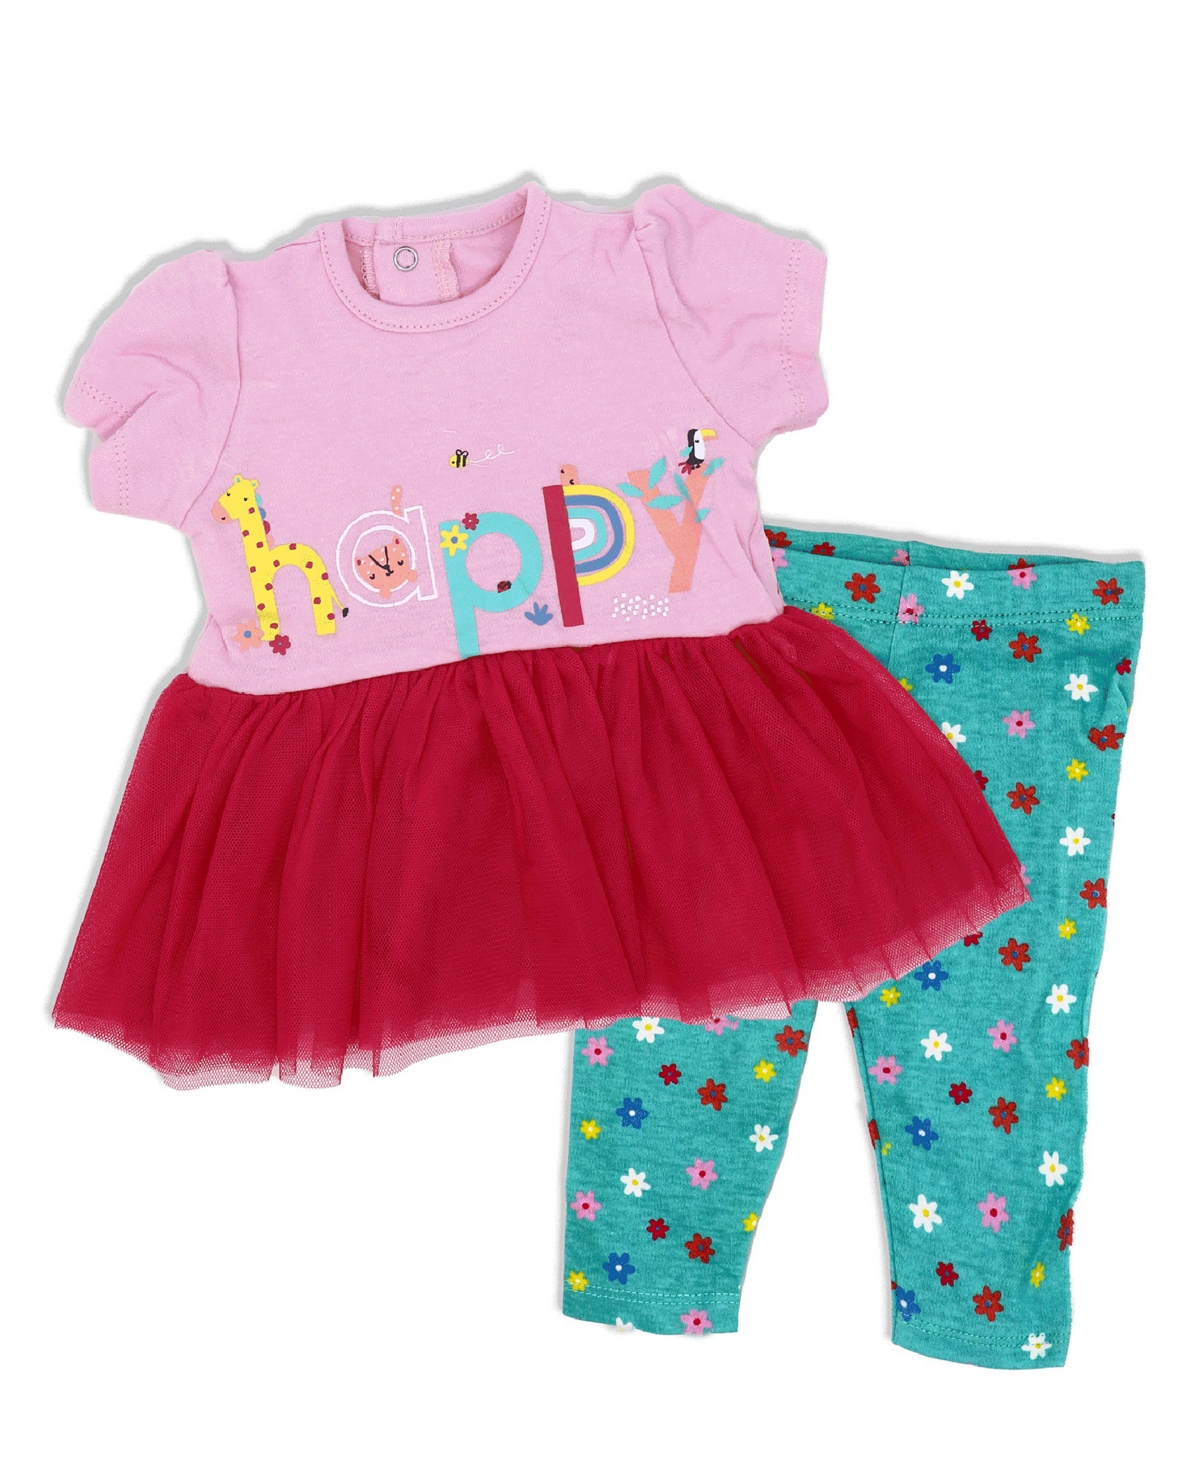 Lily & Jack Baby Girls Short Sleeved Happy Tutu Dress And Leggings, 2 Piece Set In Pink